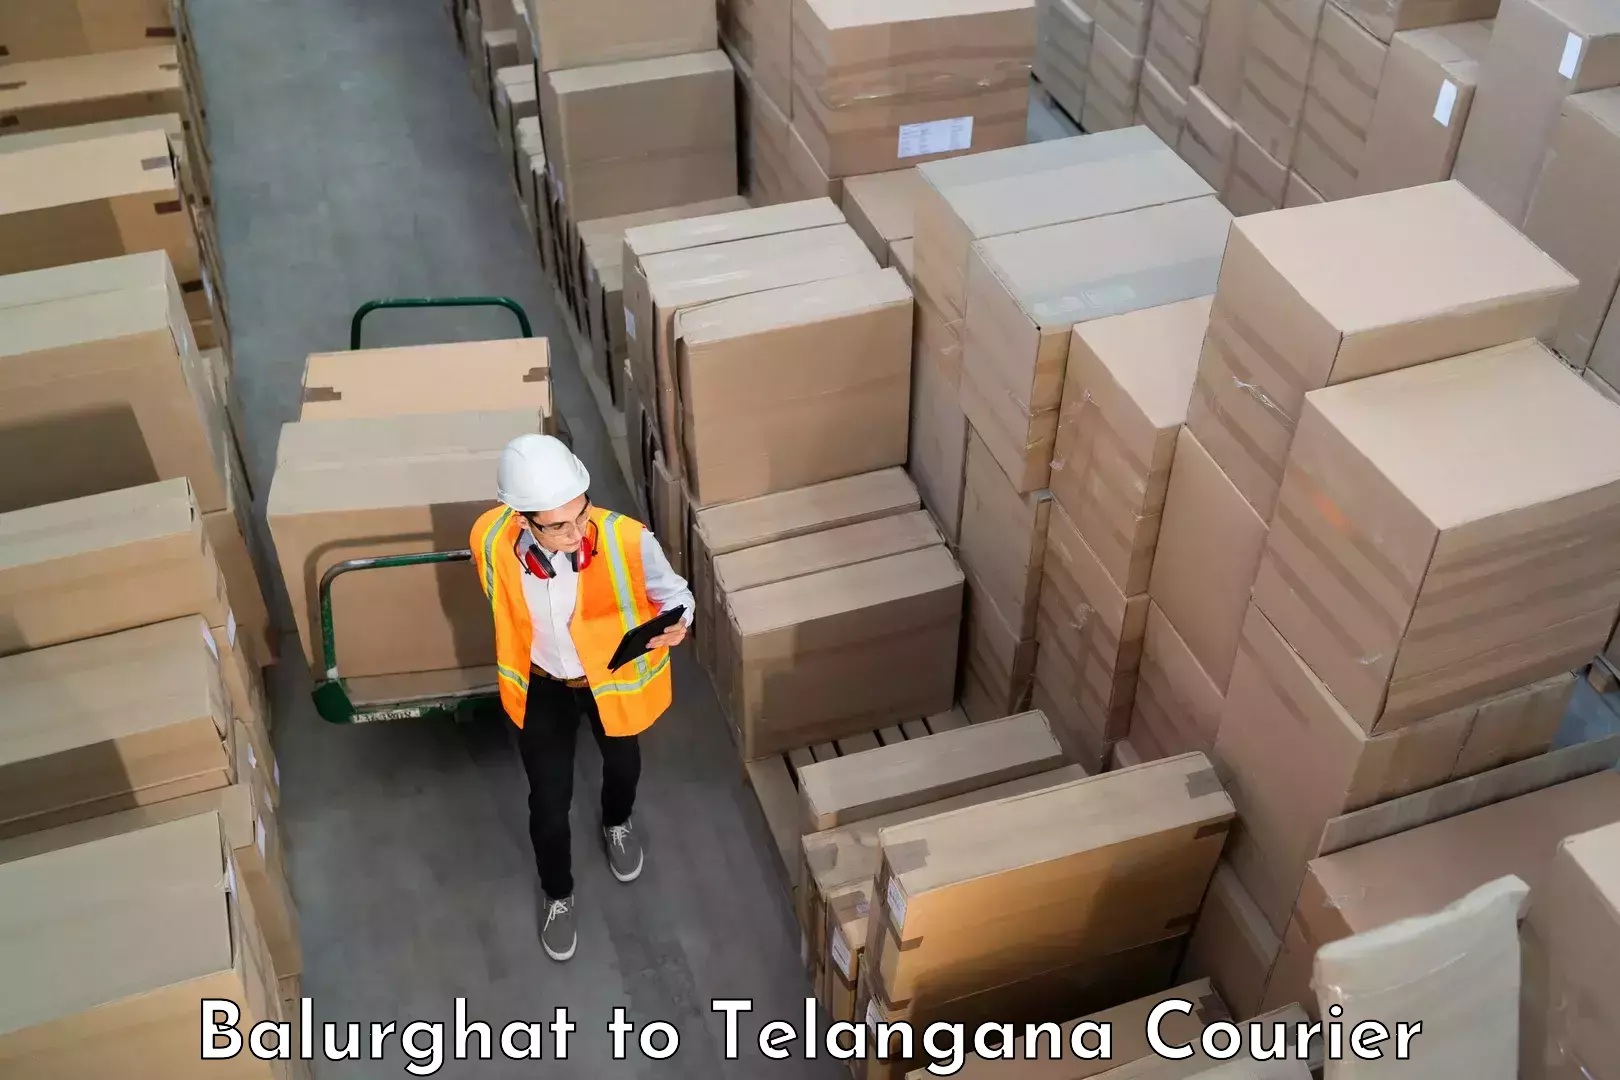 Luggage shipment specialists Balurghat to Netrang